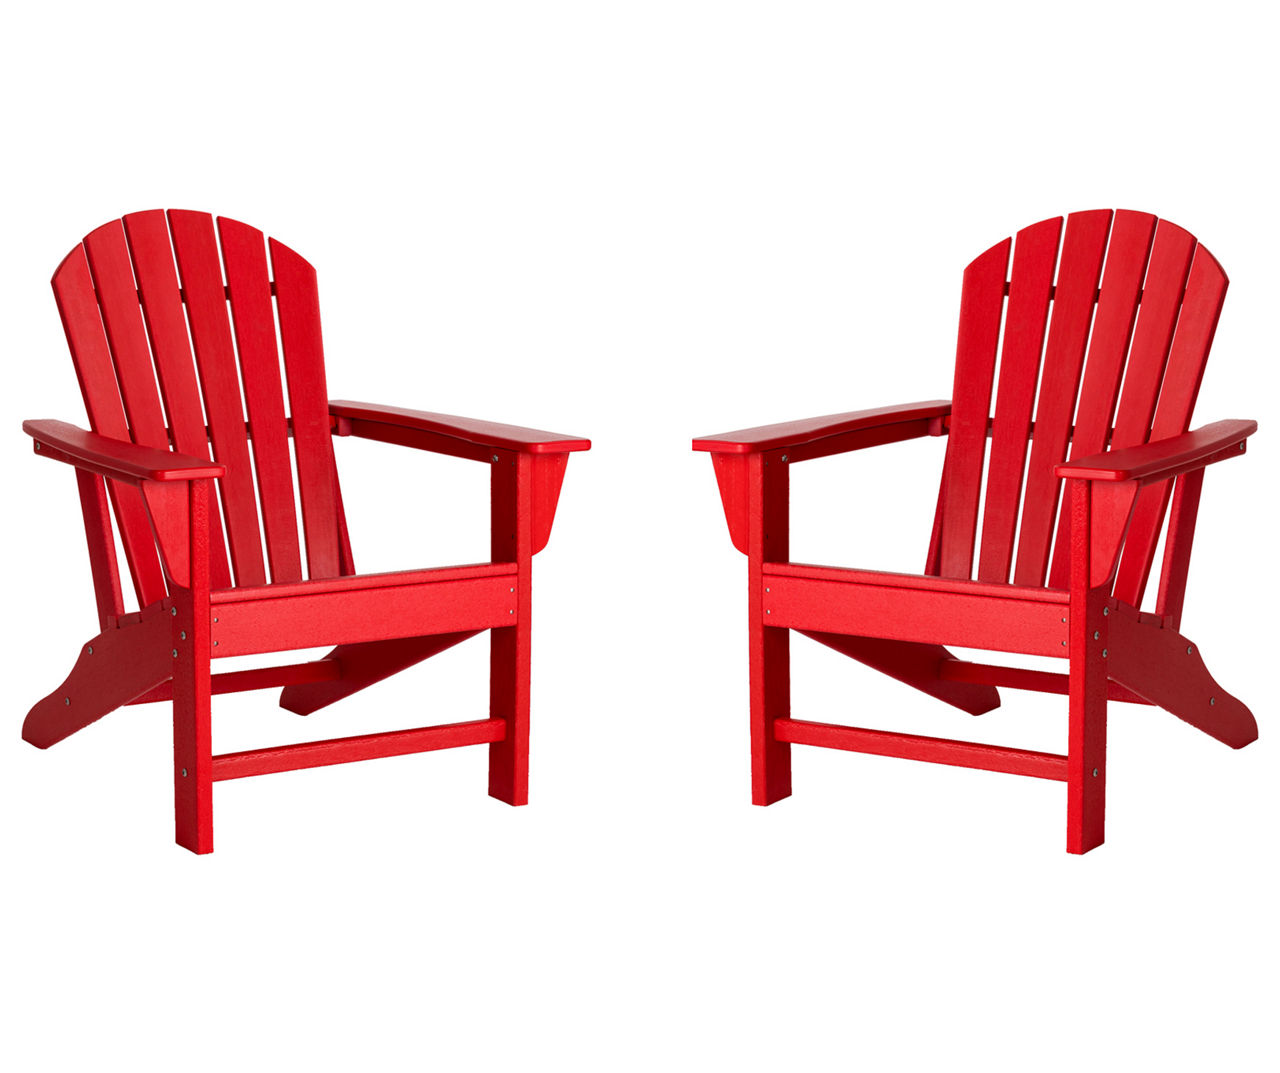 Red Adirondack HDPE Outdoor Chairs, 2-Pack